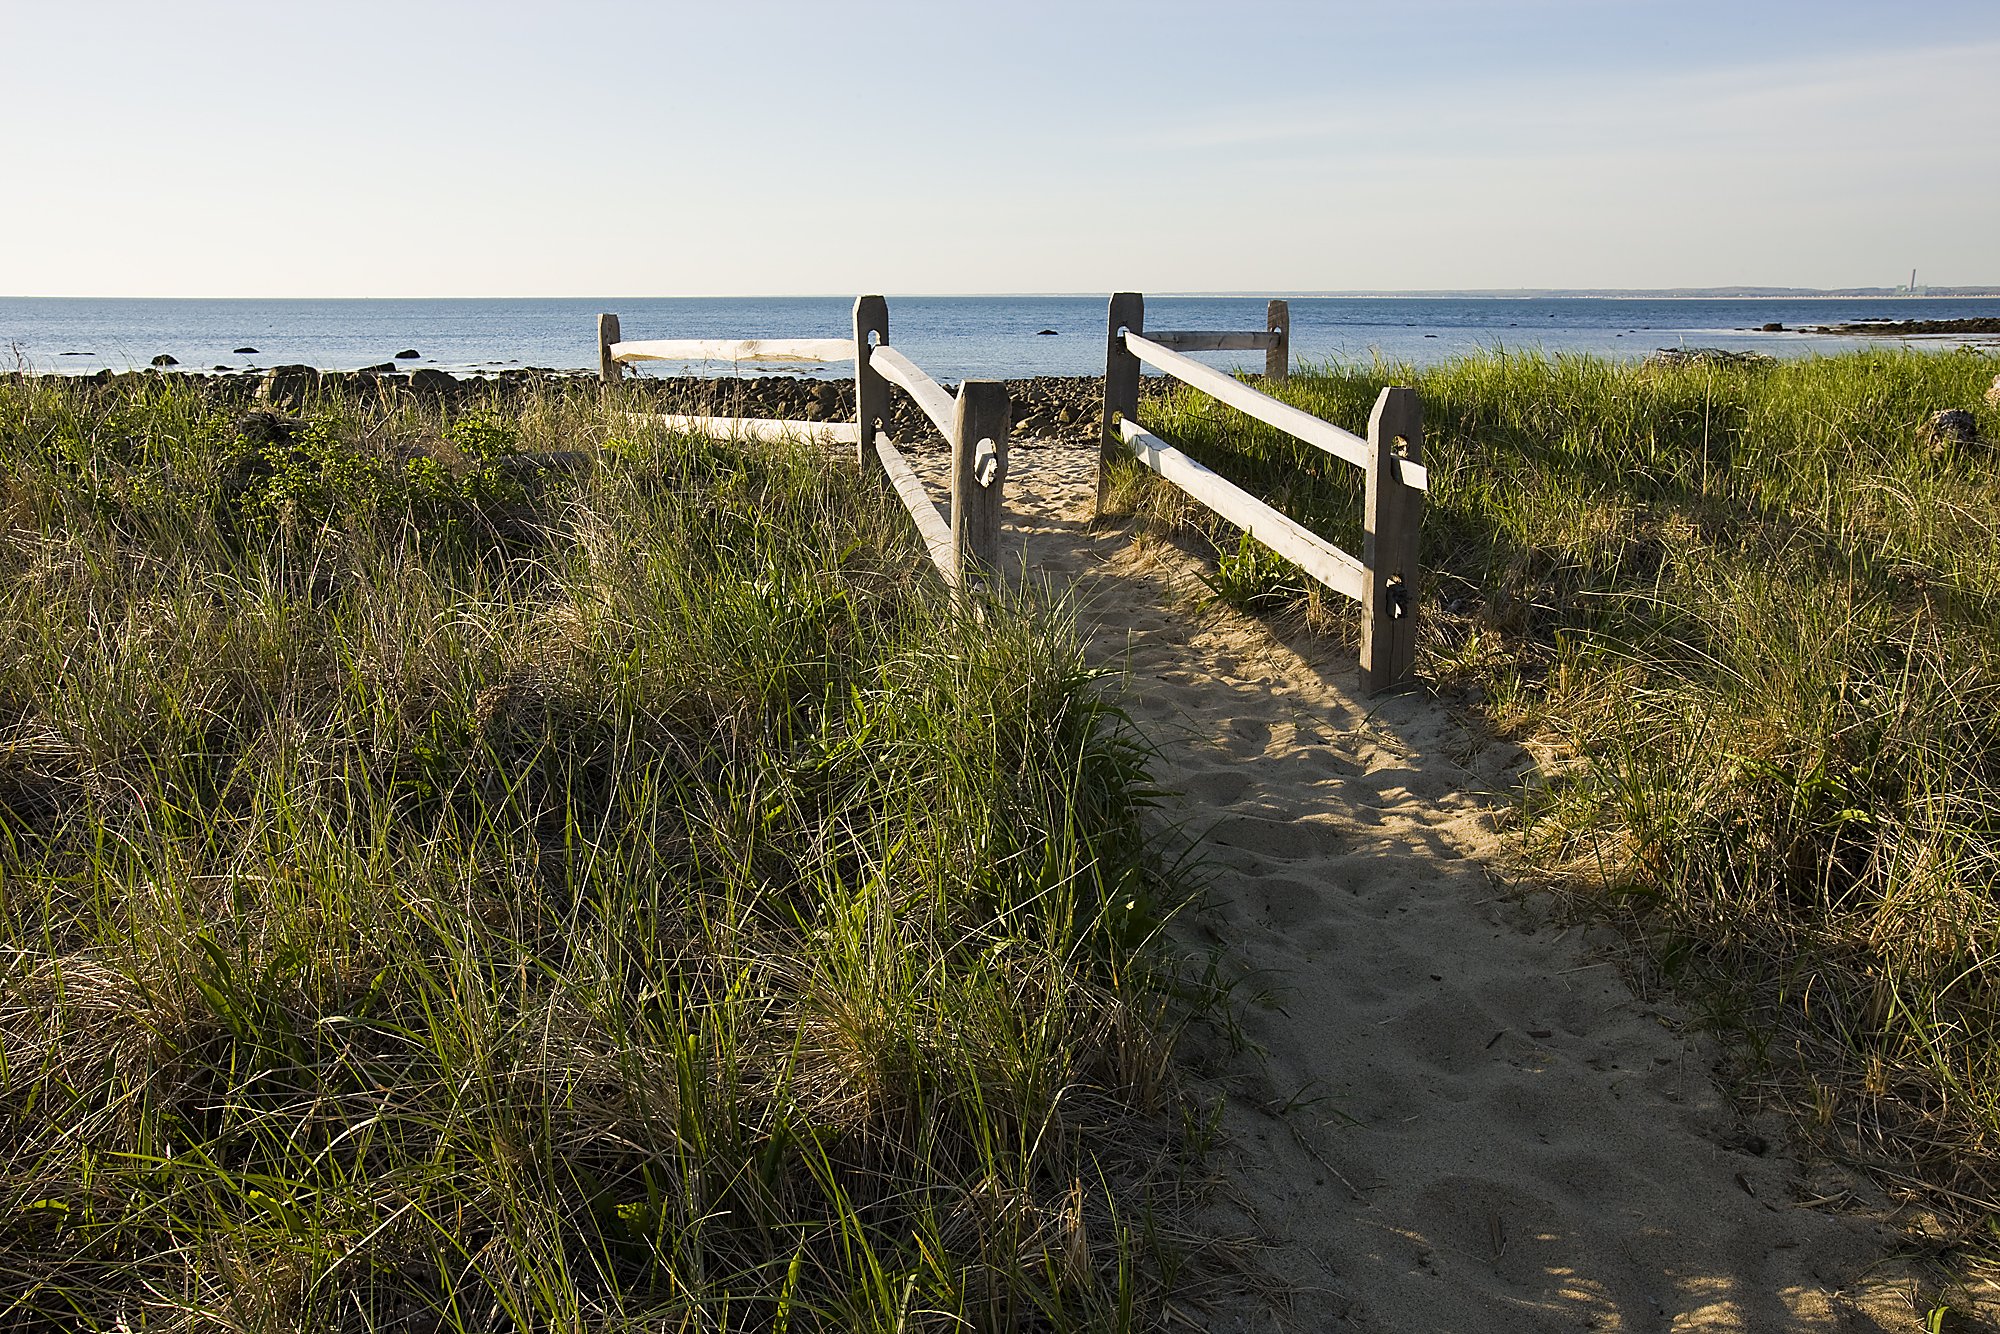  The path to the beach at the Center Hill Preserve in Plymouth, Massachusetts.  Cape Cod Bay. 